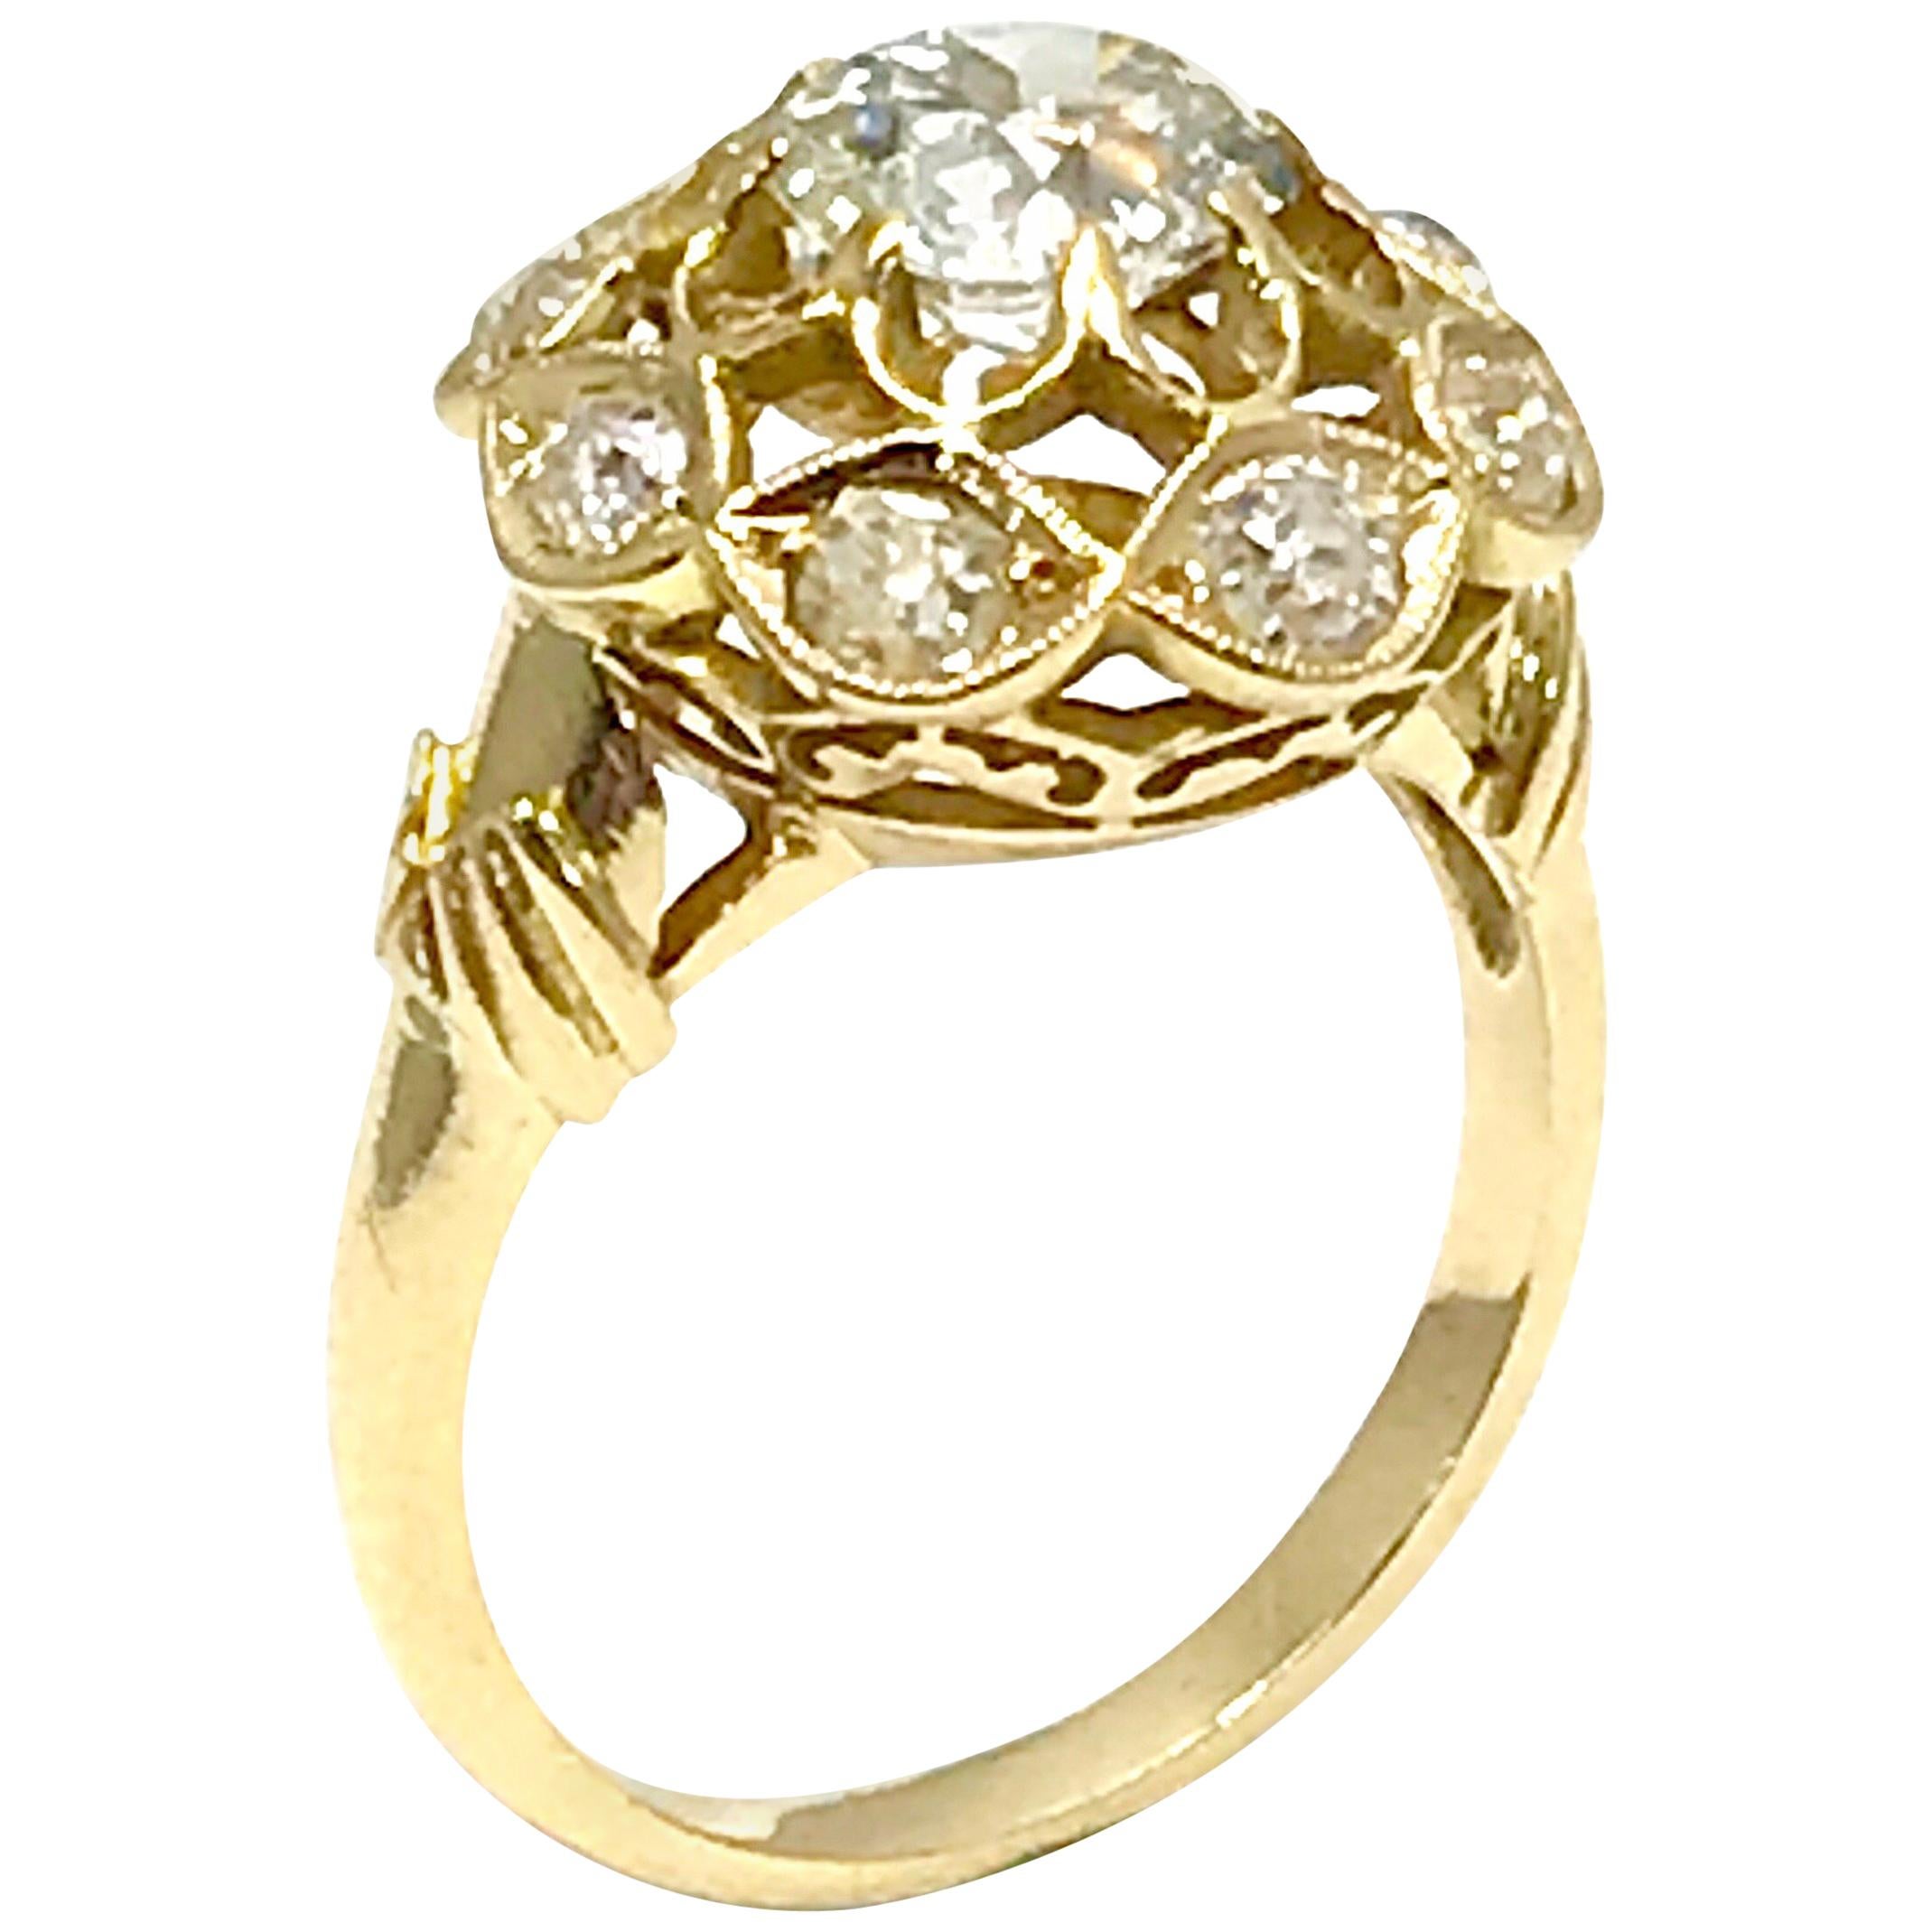 1.29 Carat Old Mine Cut Diamond and 18 Karat Gold Engagement or Fashion Ring For Sale